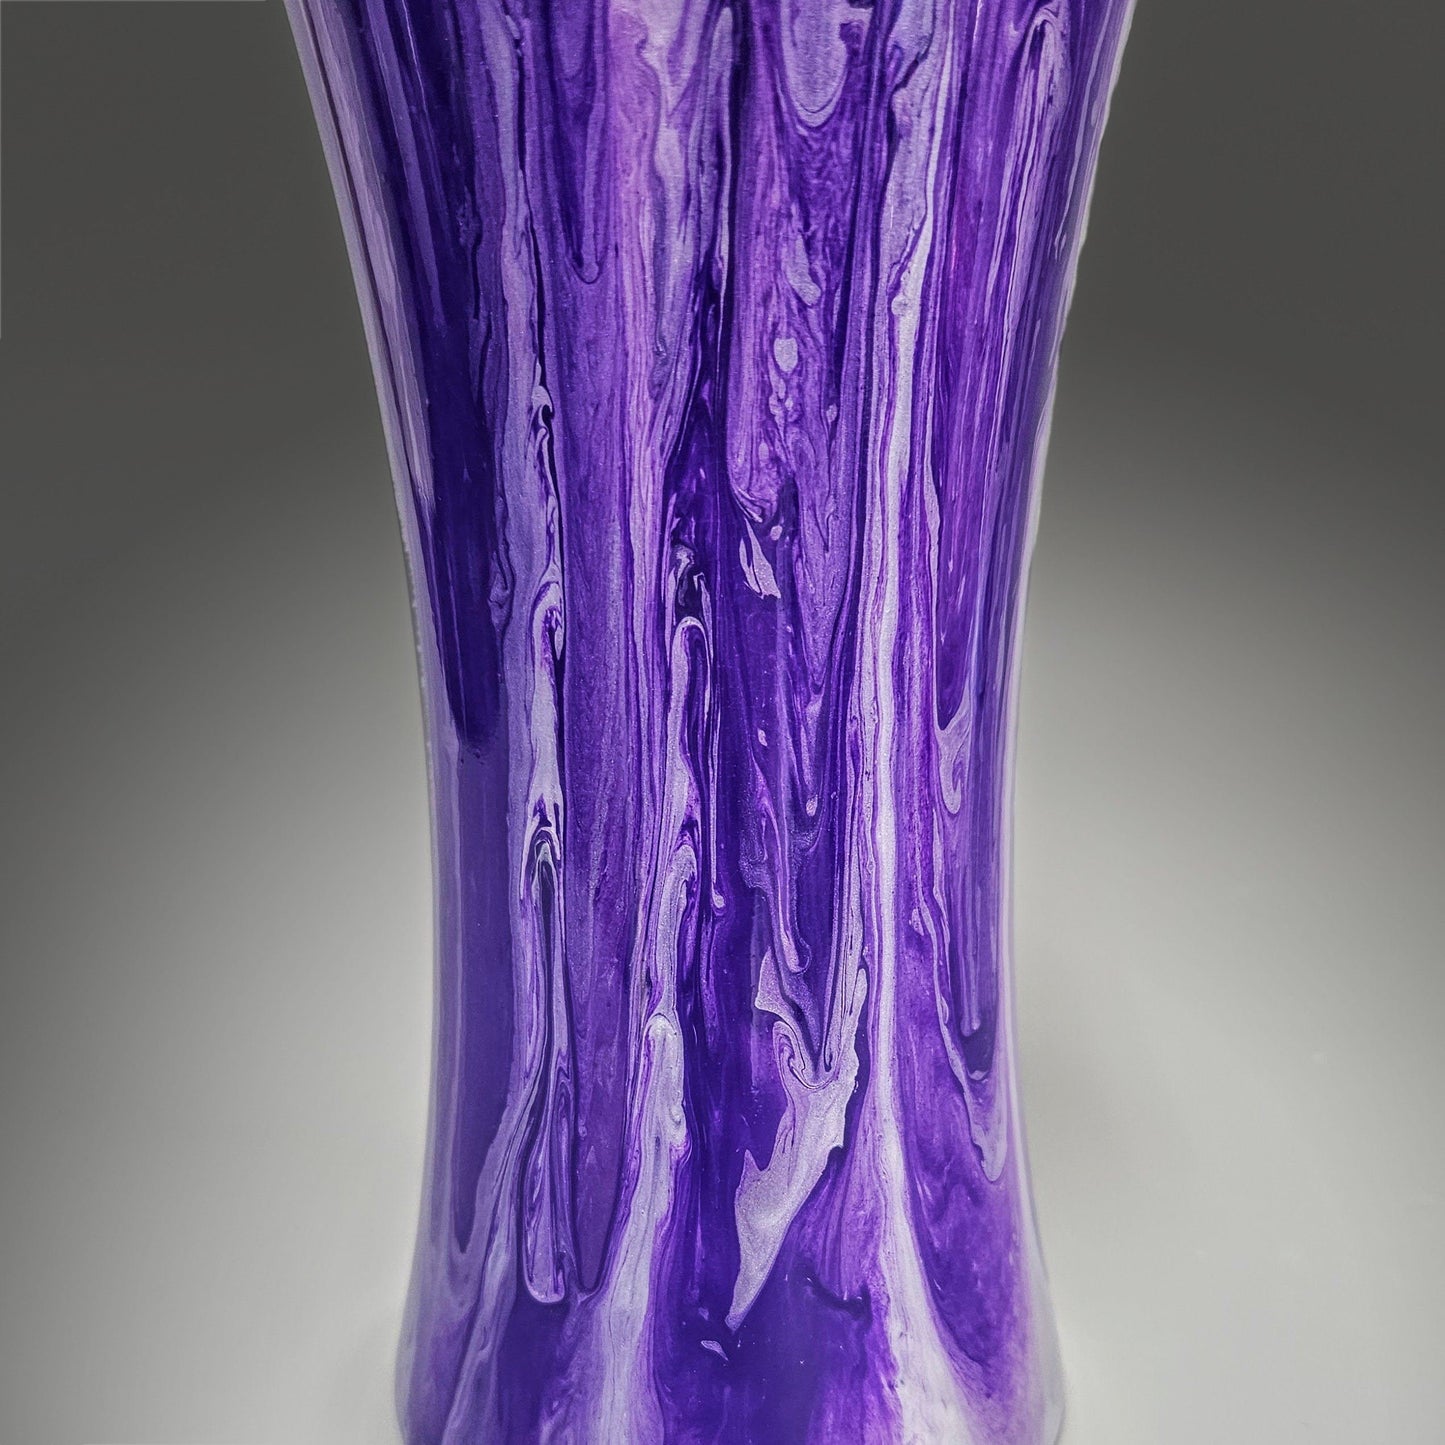 Fluid Art Glass Vase in Purple and Pearl White